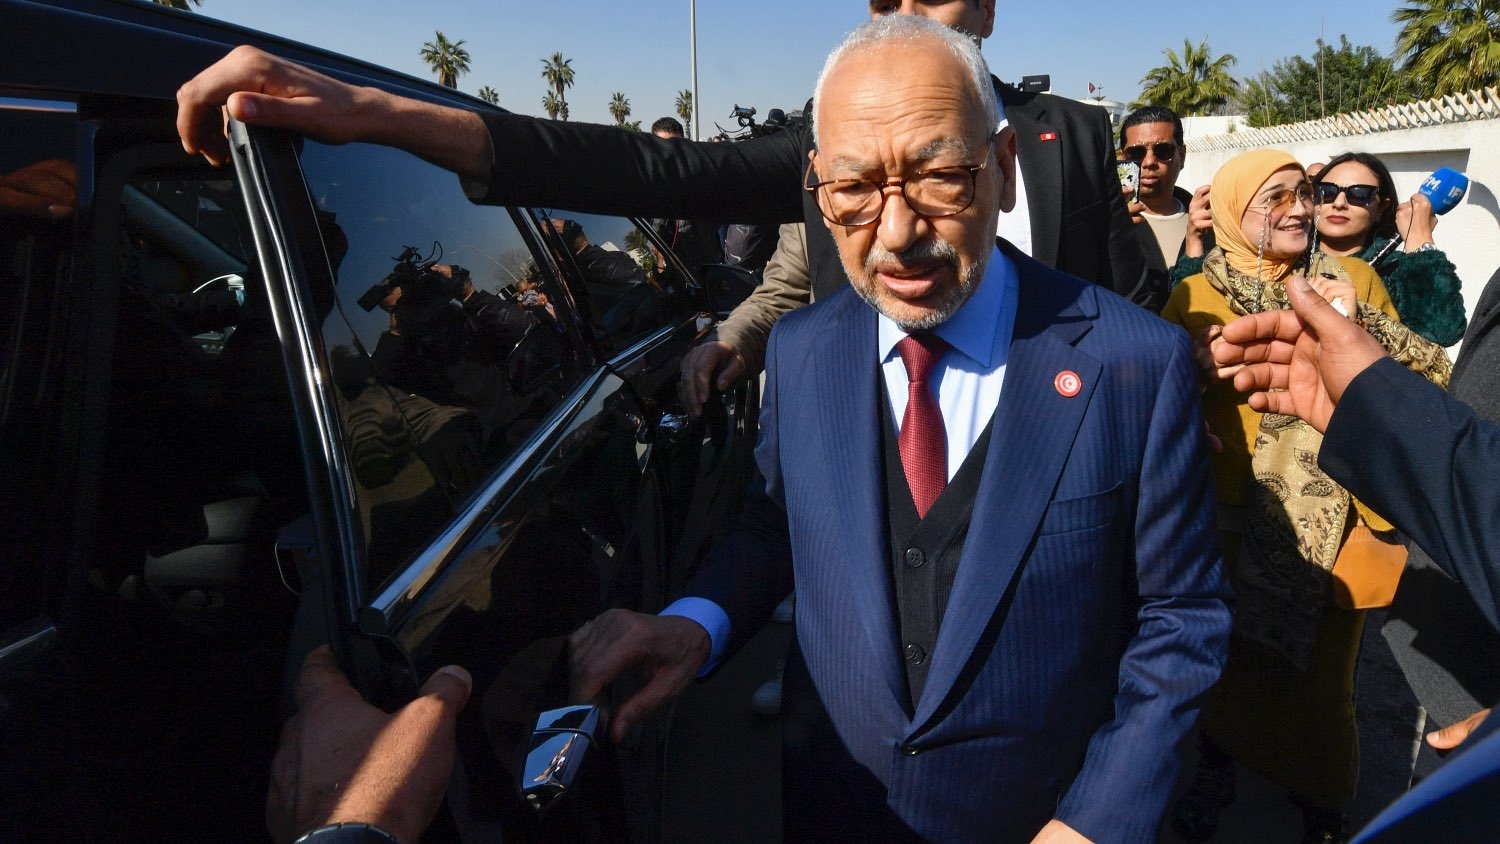 Ghannouchi, the former speaker of Tunisia's parliament, was arrested last week during a raid on his home.